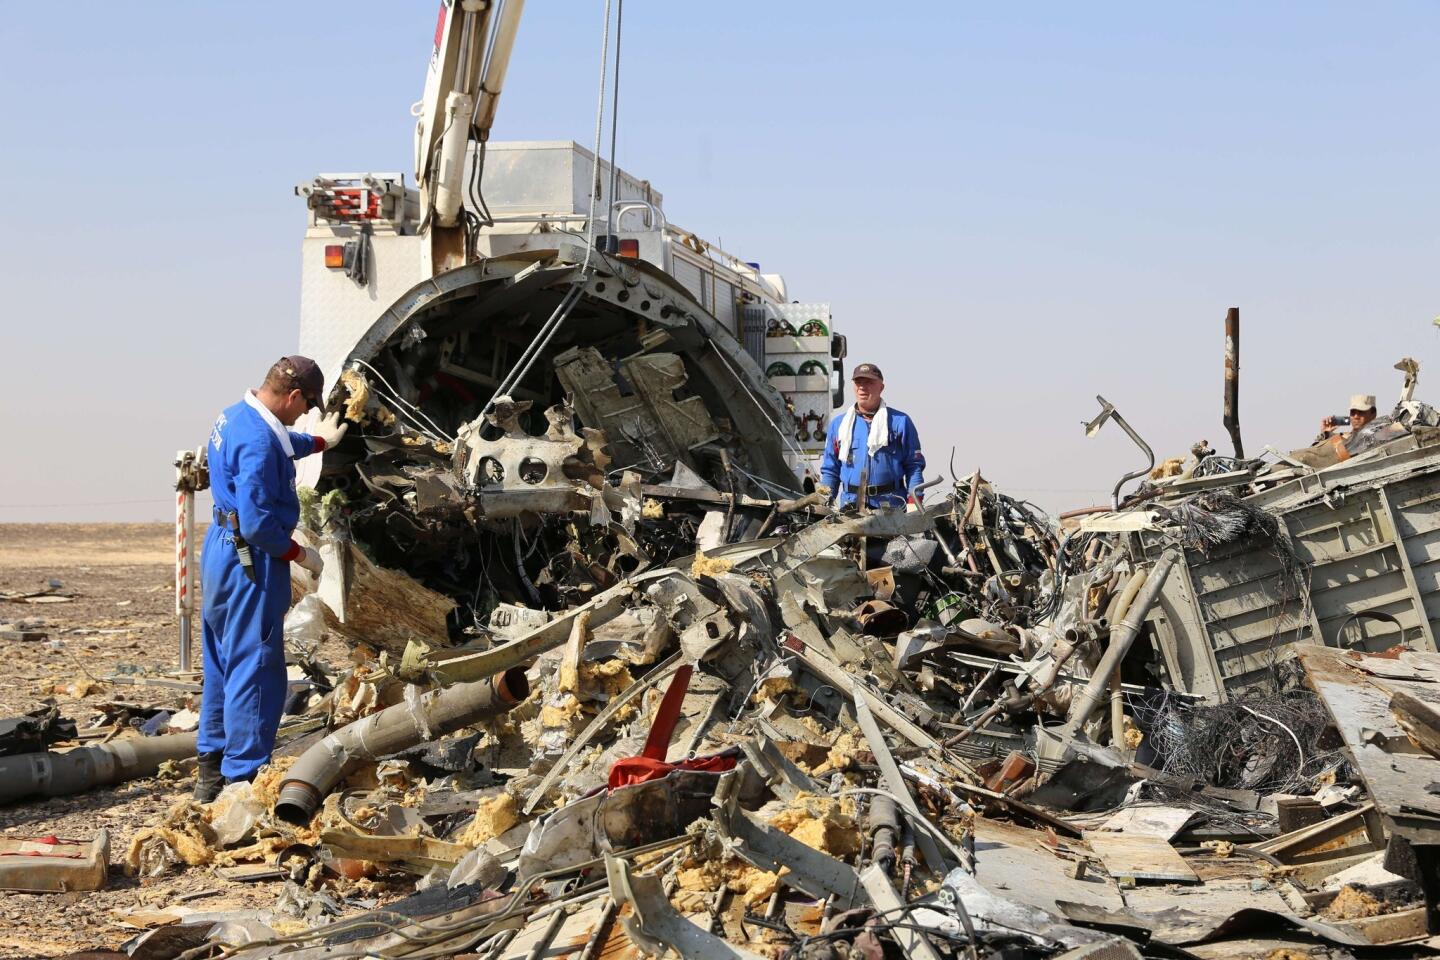 Russian emergency services personnel at the crash site of a A321 Russian airliner in Wadi al-Zolomat, a mountainous area of Egypt's Sinai Peninsula.